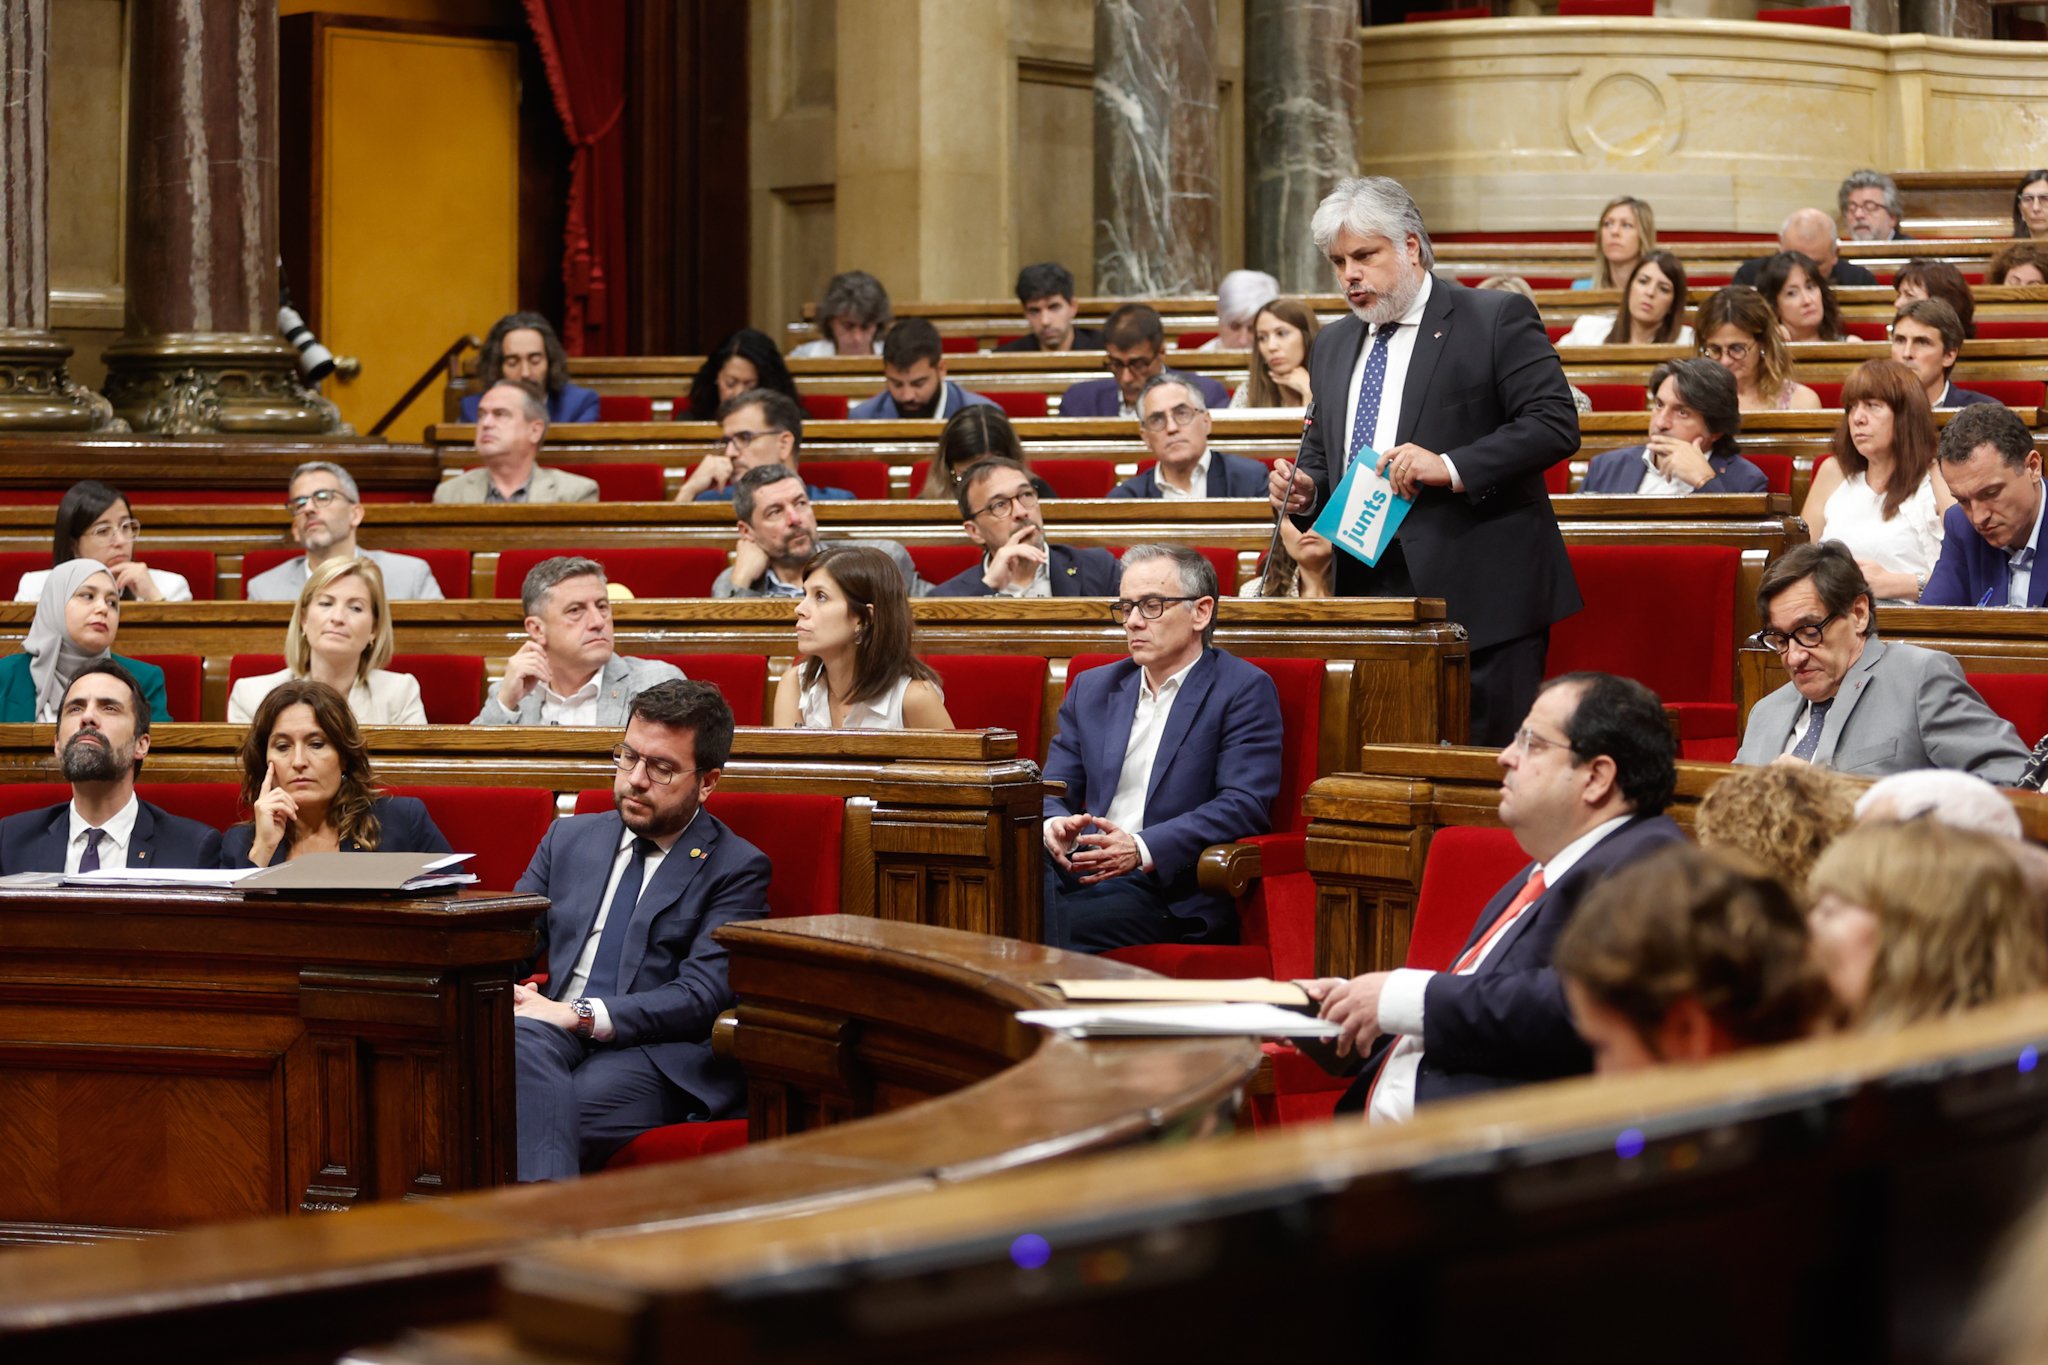 Junts withdraws motion on Israel and instead will work for joint declaration by Catalan Parliament